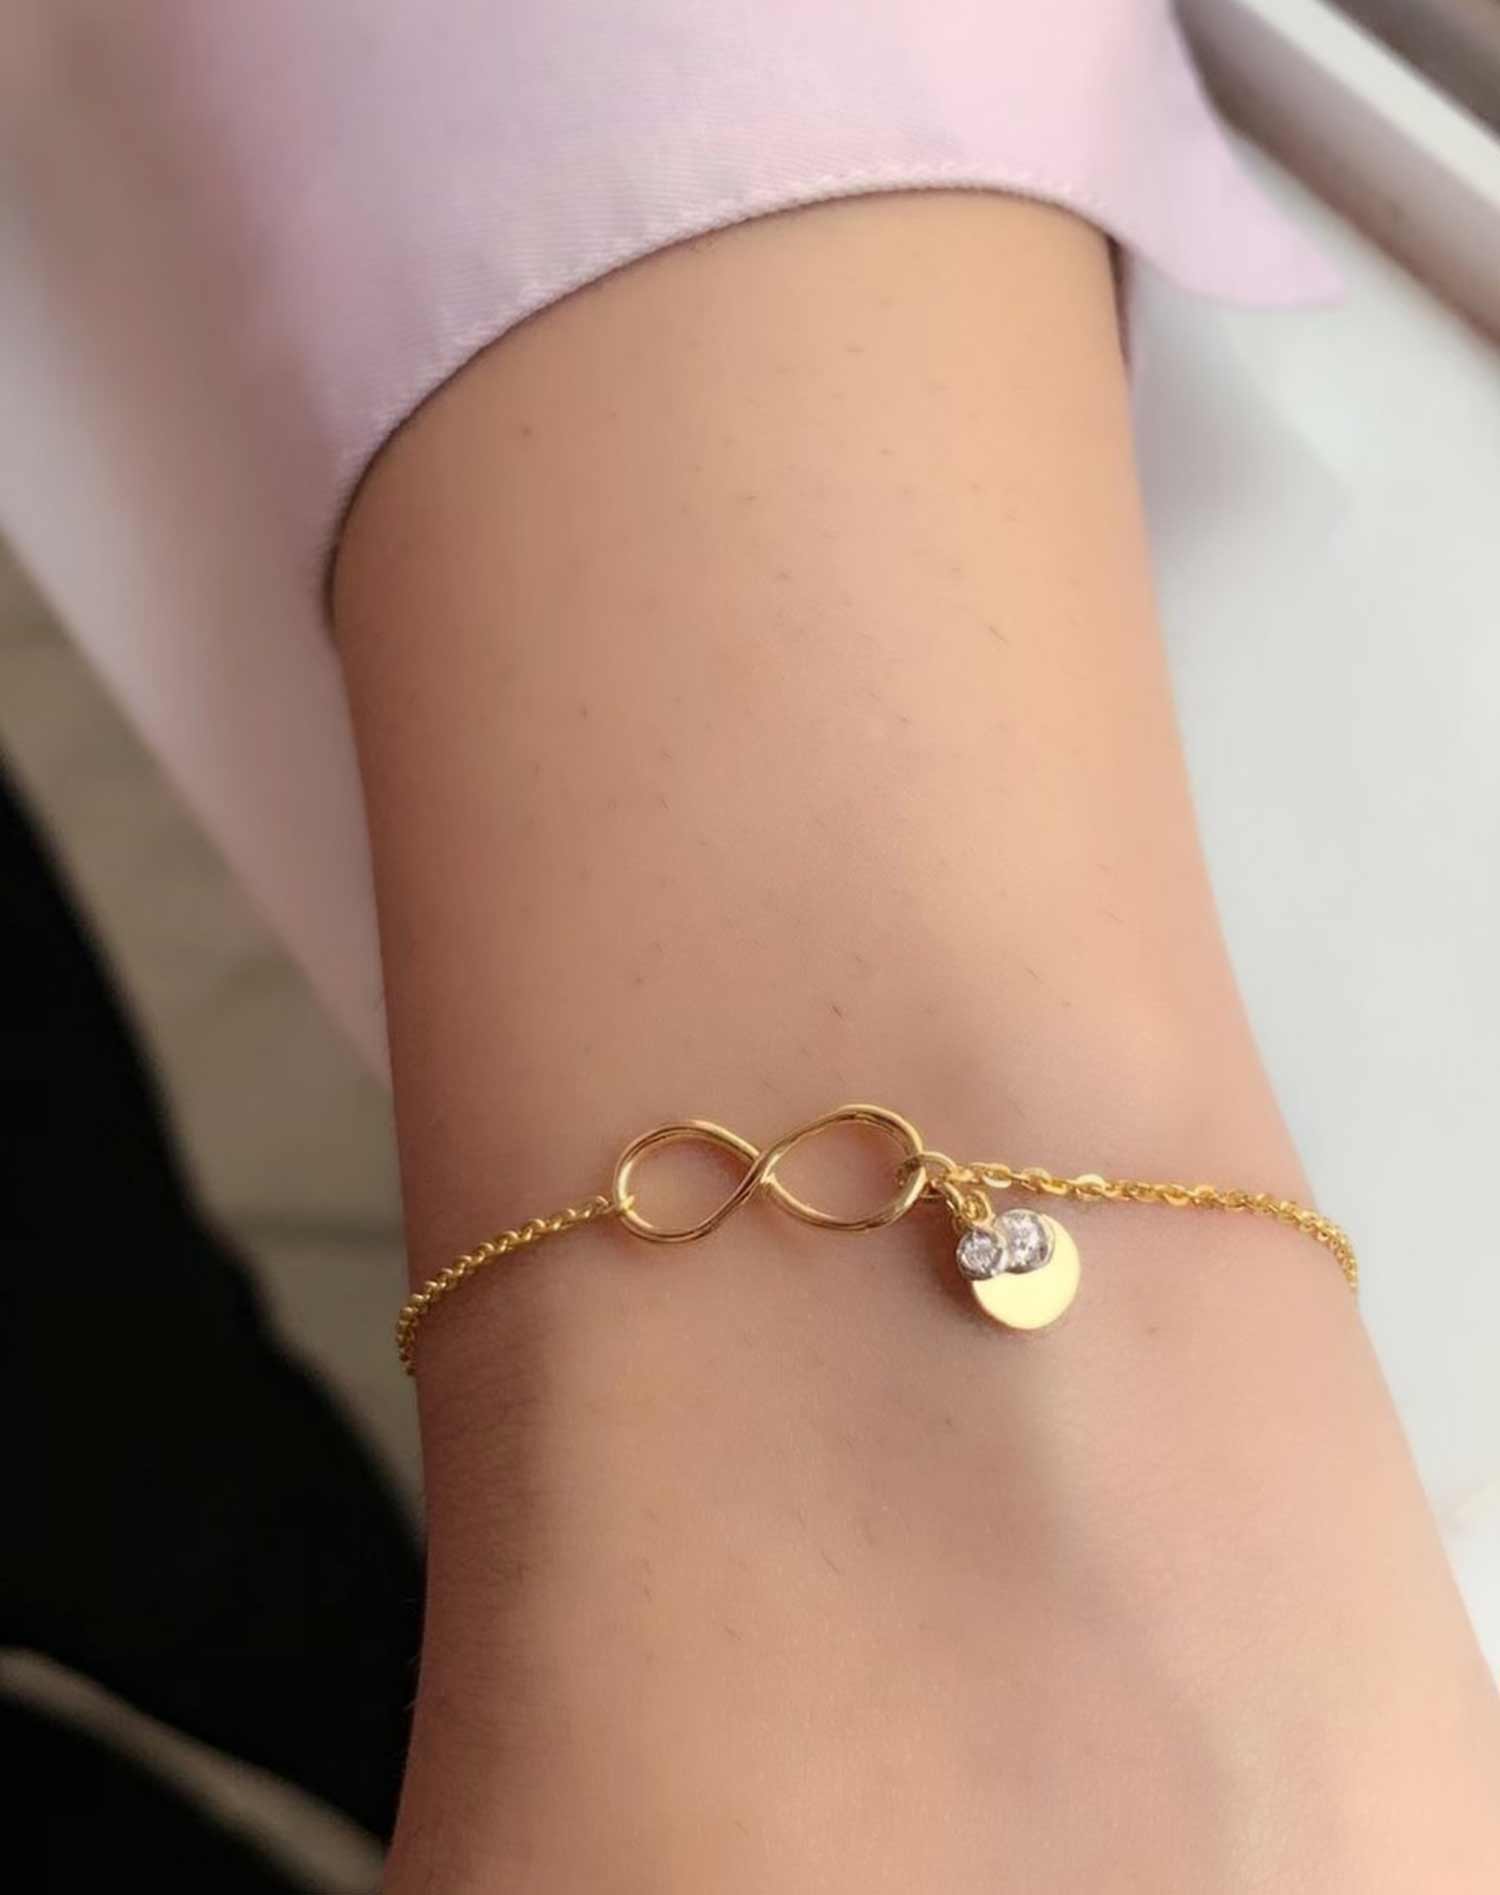 OOMPH Gold Tone Heart Partners In Crime Best Friend Couple Bracelet Set  Of 2 For Unisex Buy OOMPH Gold Tone Heart Partners In Crime Best Friend Couple  Bracelet Set Of 2 For